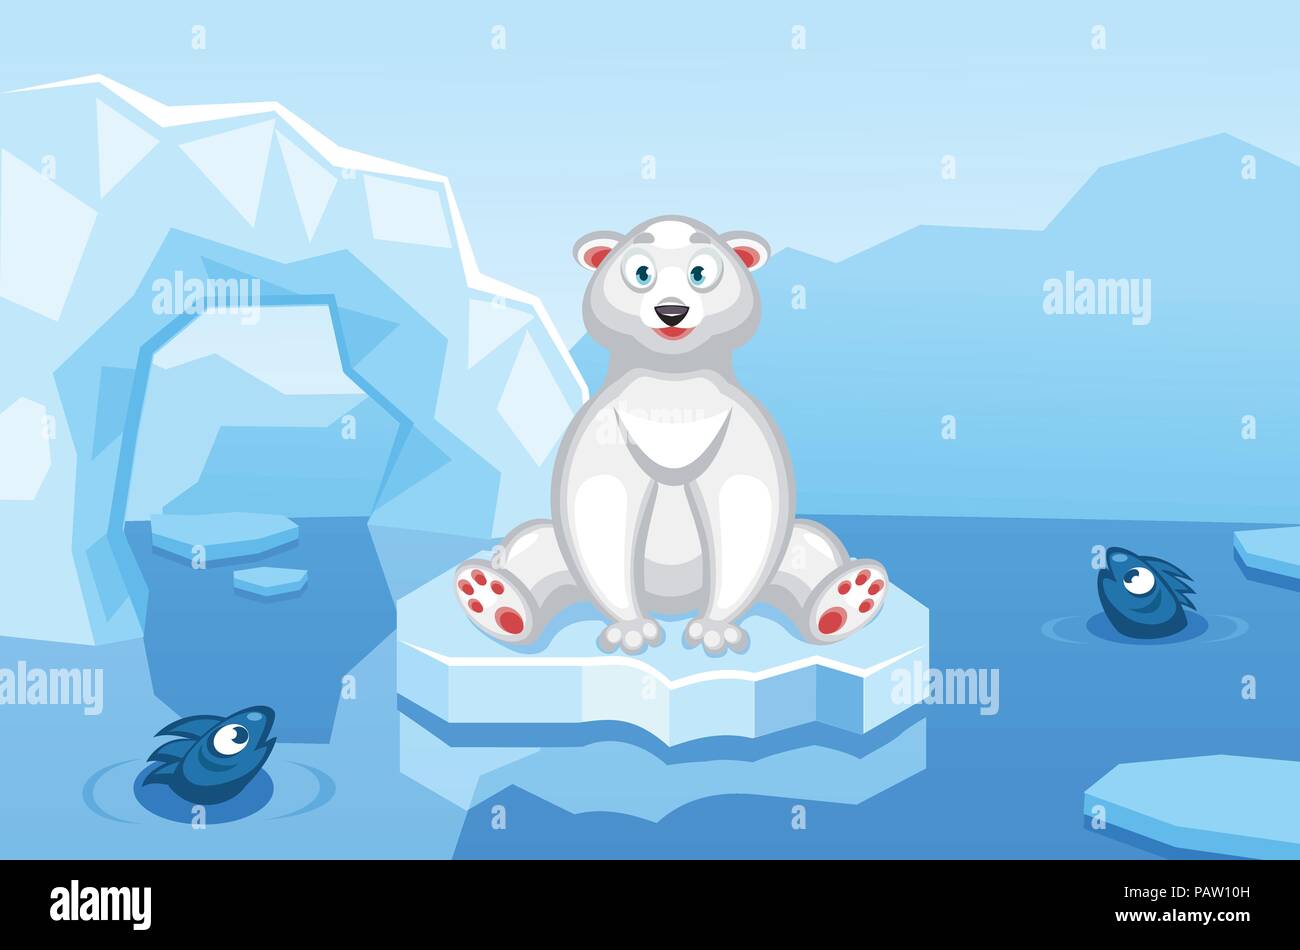 Illustration of a polar bear on an arctic vector background with ice floes, icebergs, water and fishes Stock Vector